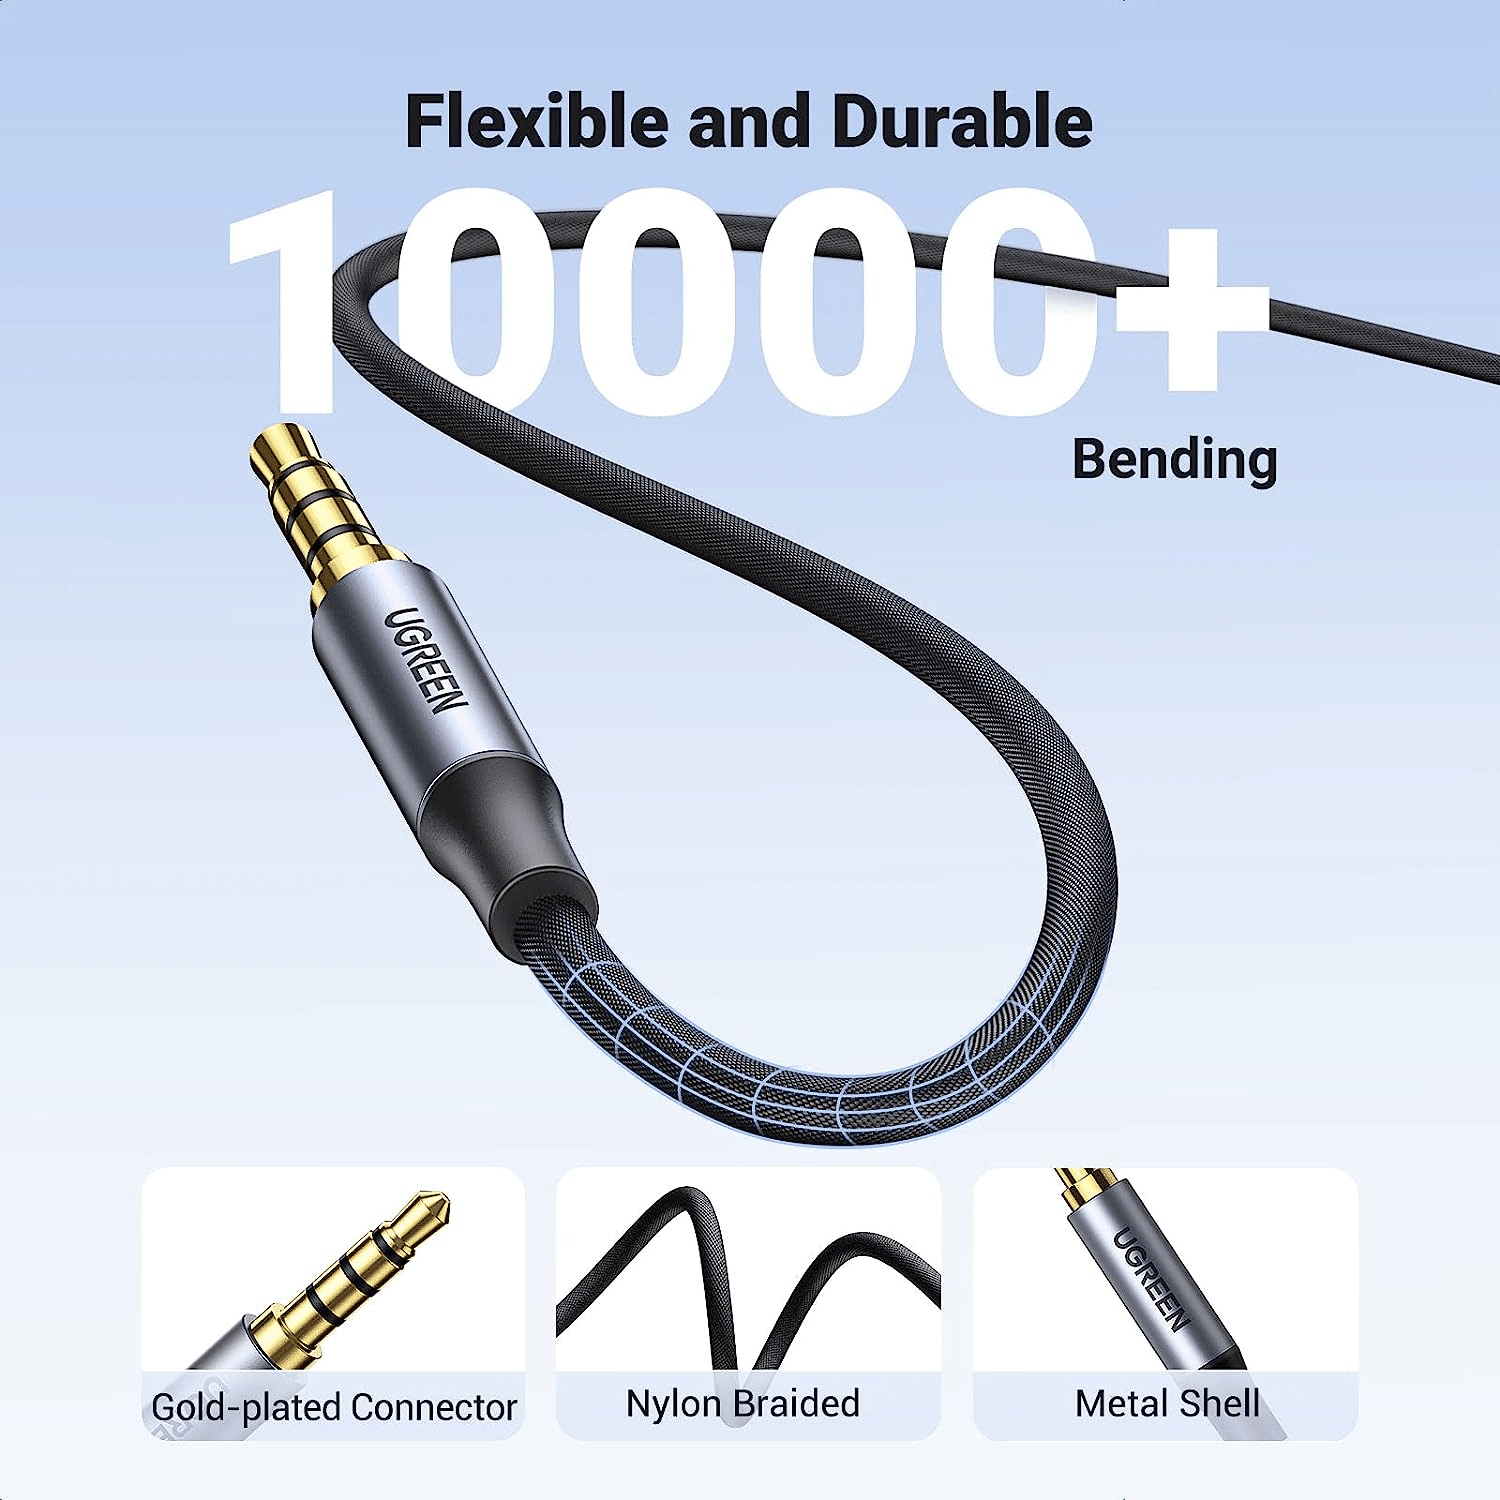 UGREEN AV183 4 Pole 3.5mm Male to 3.5mm Male Aux Audio Cable 20783 3